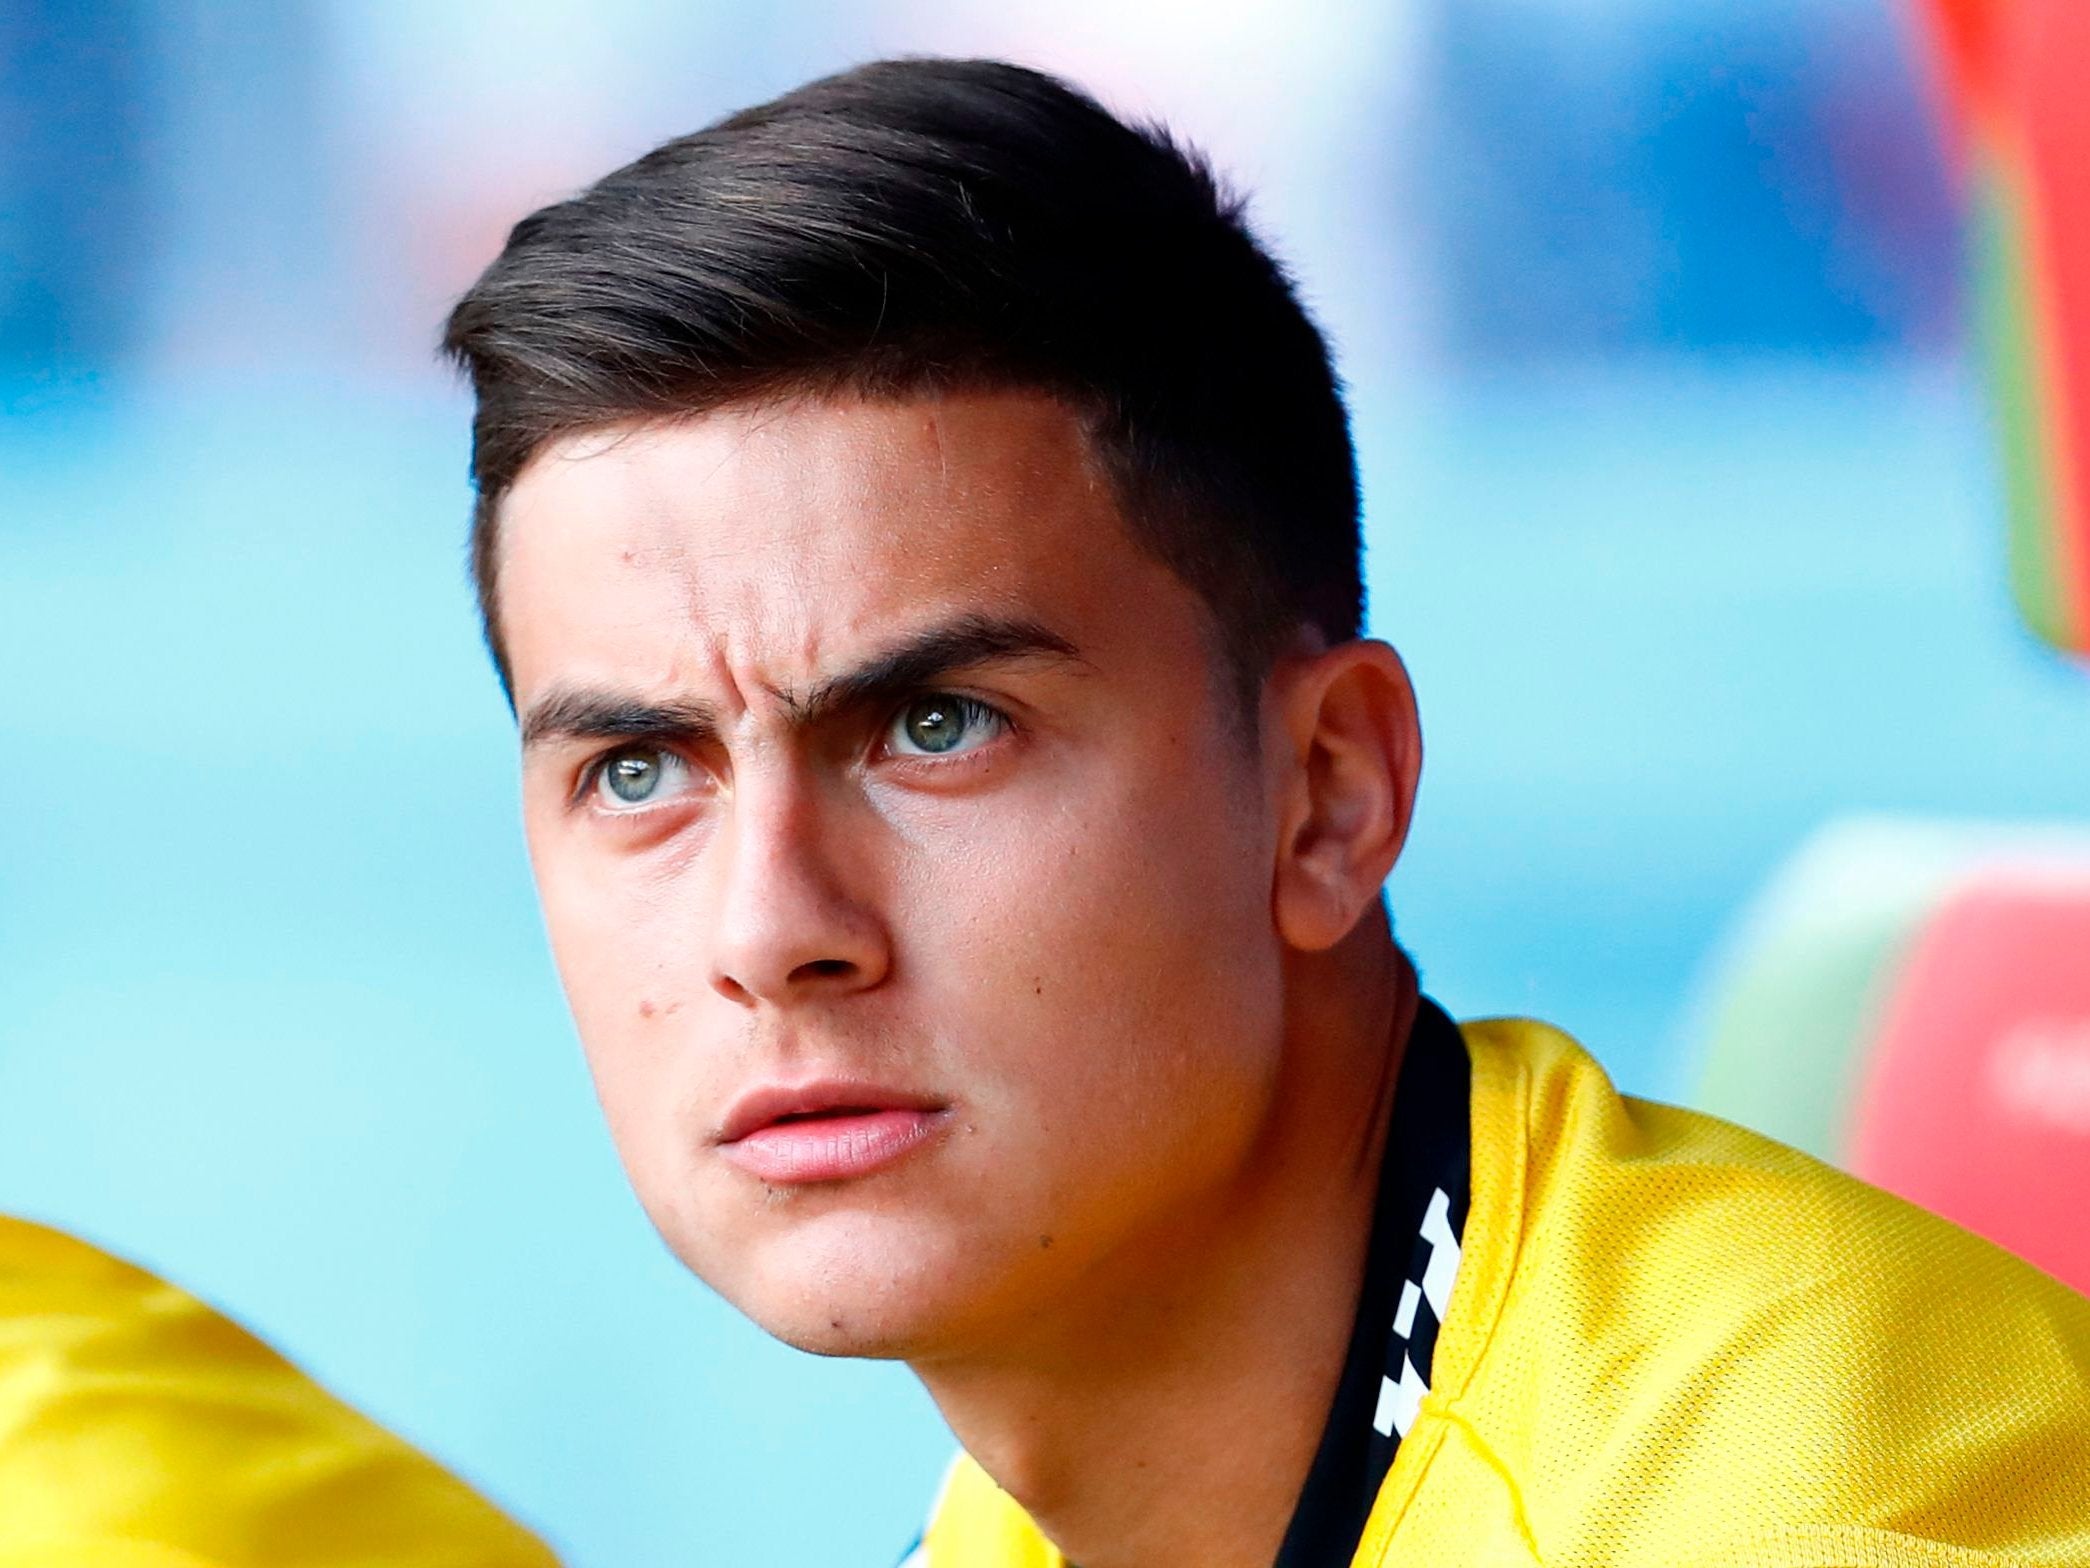 Transfer news, rumours LIVE - Liverpool want Paulo Dybala after Juventus sign Cristiano Ronaldo, Manchester United to miss out on target, Arsenal latest, gossip